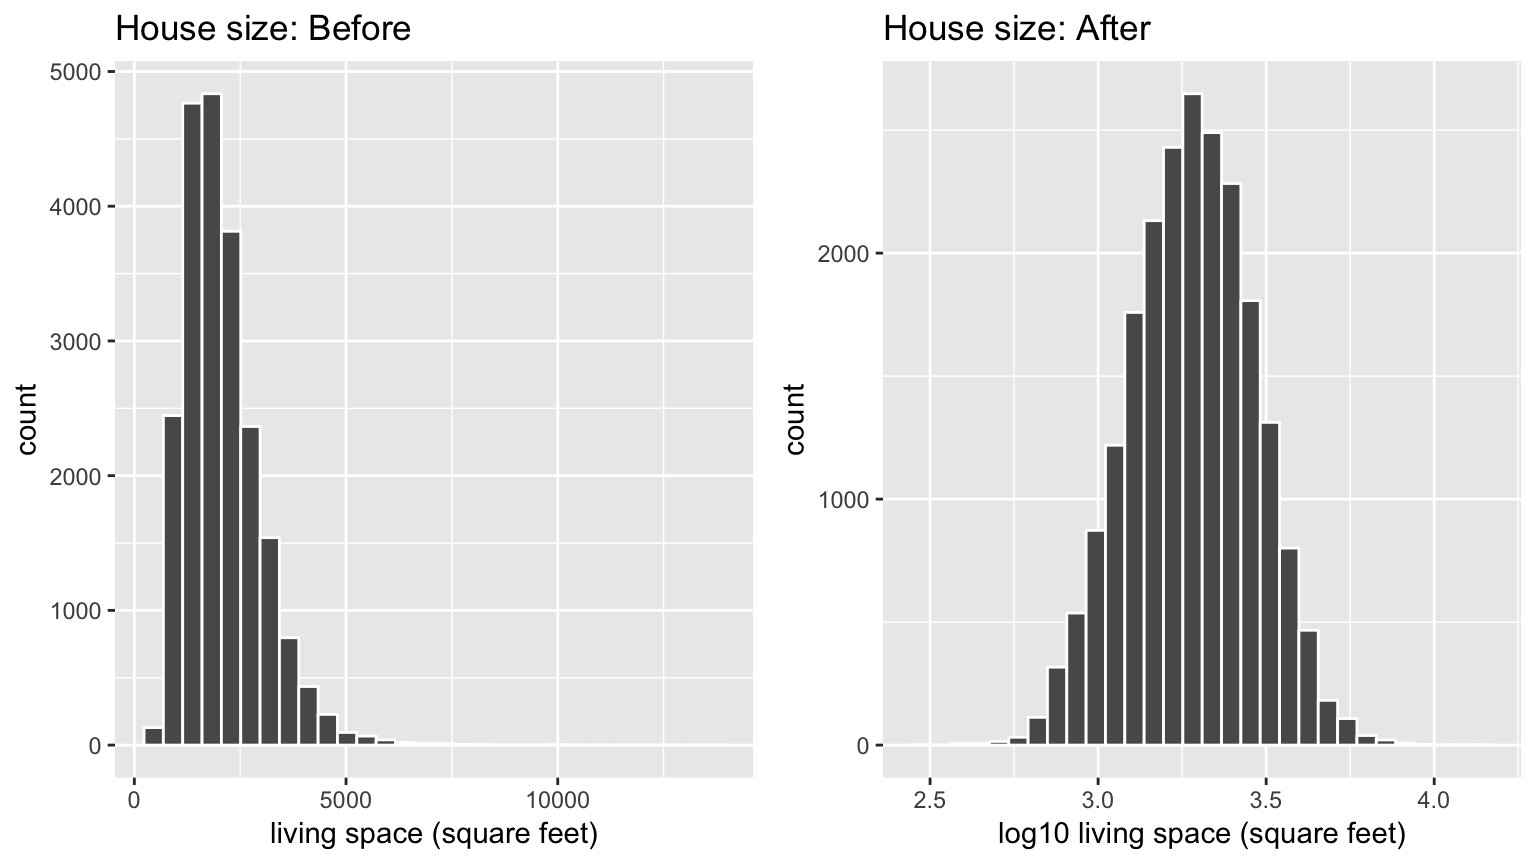 House size before and after log10-transformation